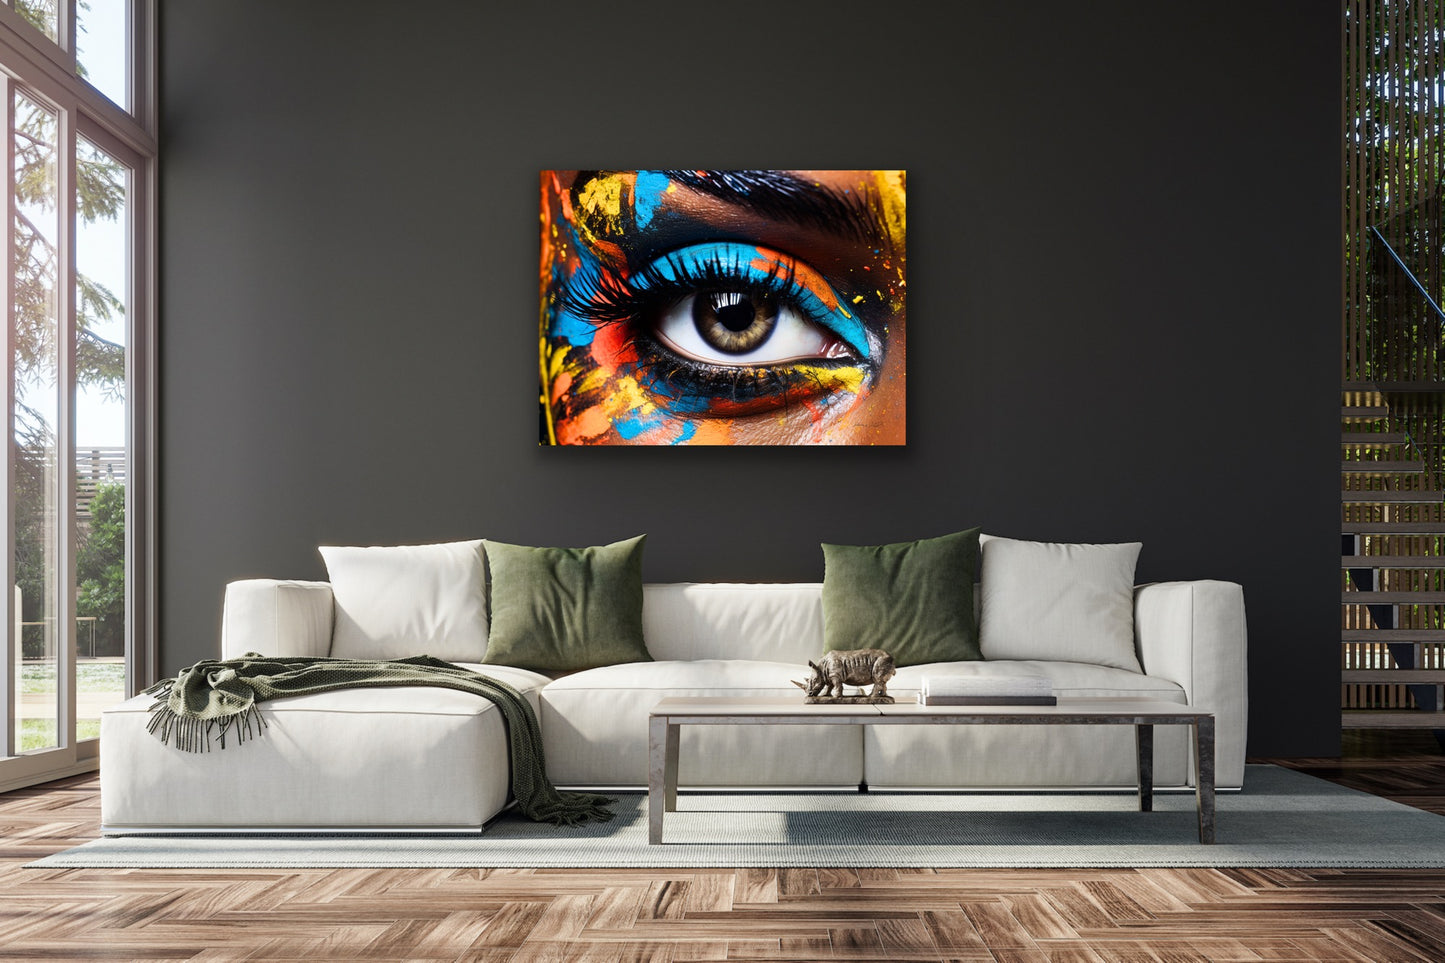 Pop of Eye Color | Stretched Canvas Print Wall Art | Black Art | African American Art